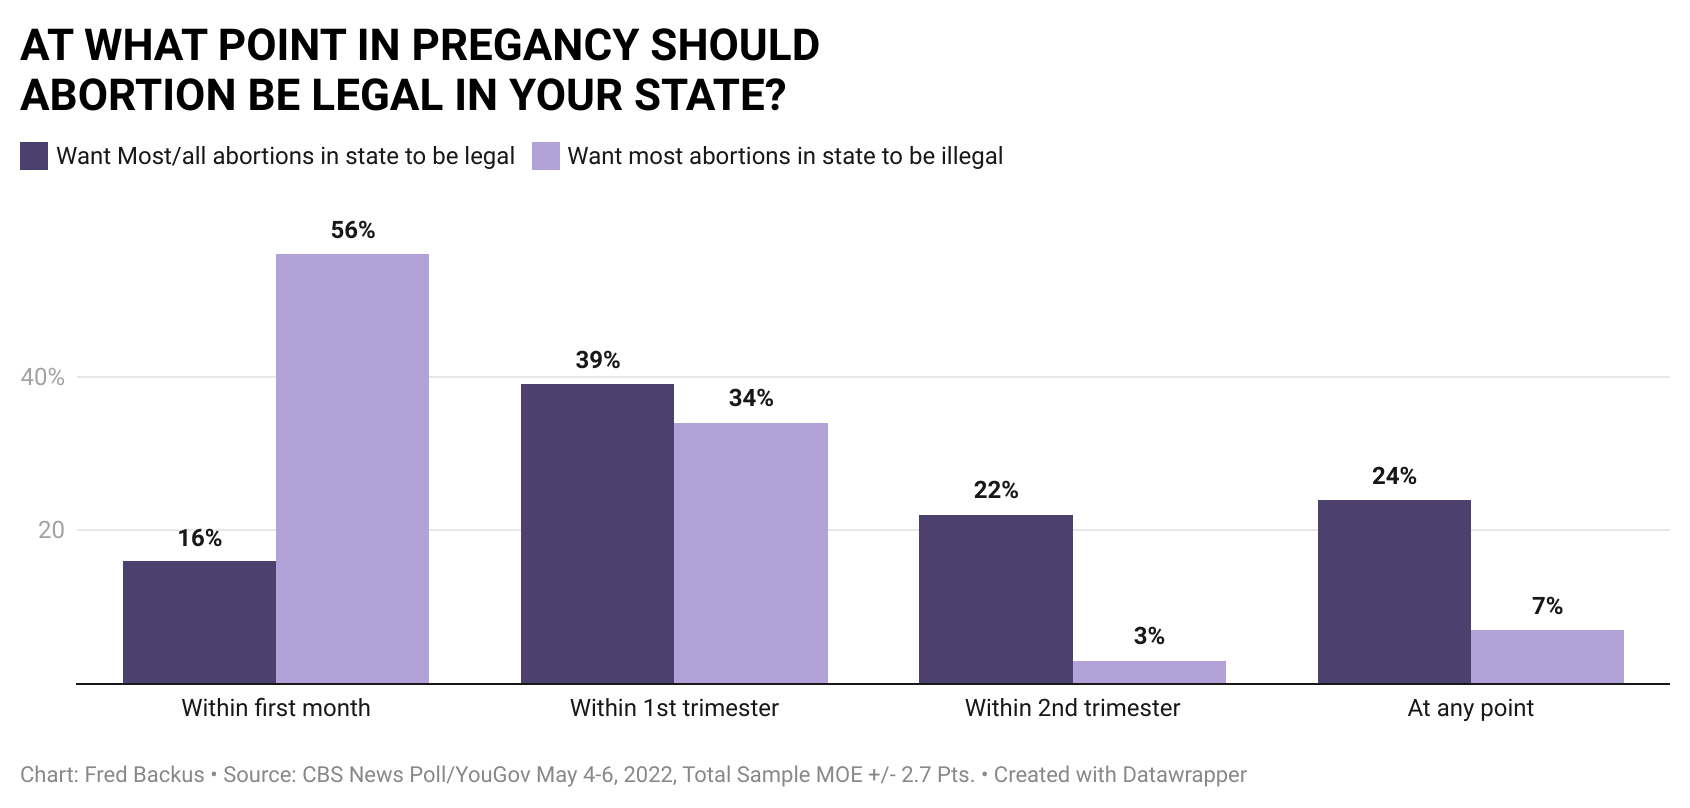 lhjbg-at-what-point-in-pregancy-should-br-abortion-be-legal-in-your-state-2.png 